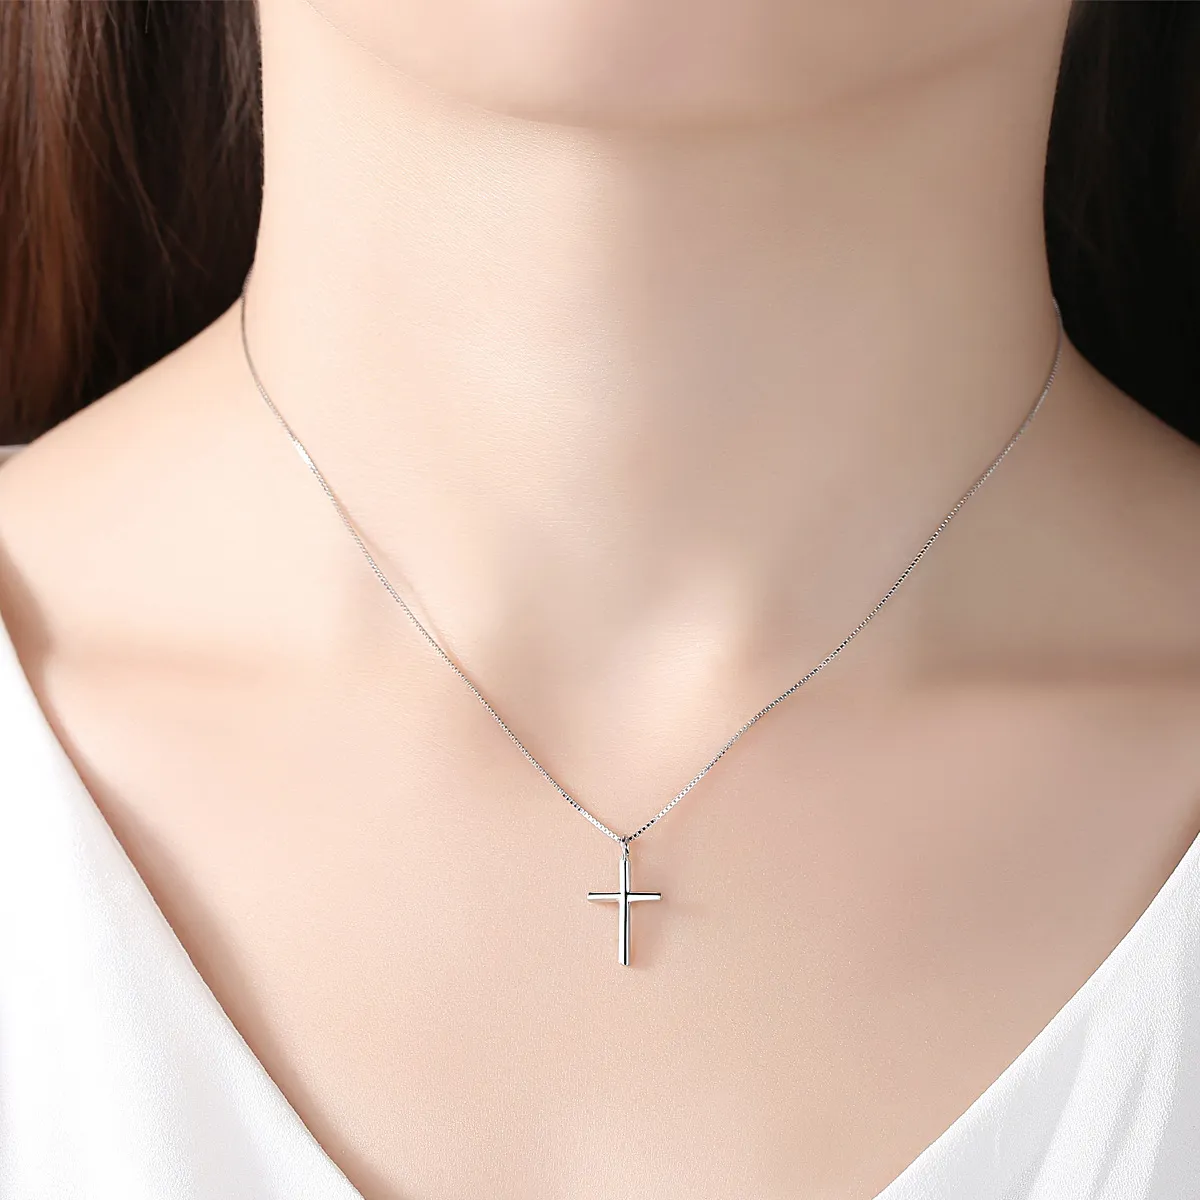 Cross Necklace S925 Sterling Silver Pendant High end Couple Necklace Neckchain Women Fashion Collar Chain Wedding Party Jewelry Valentine's Day Birthday Gift SPC